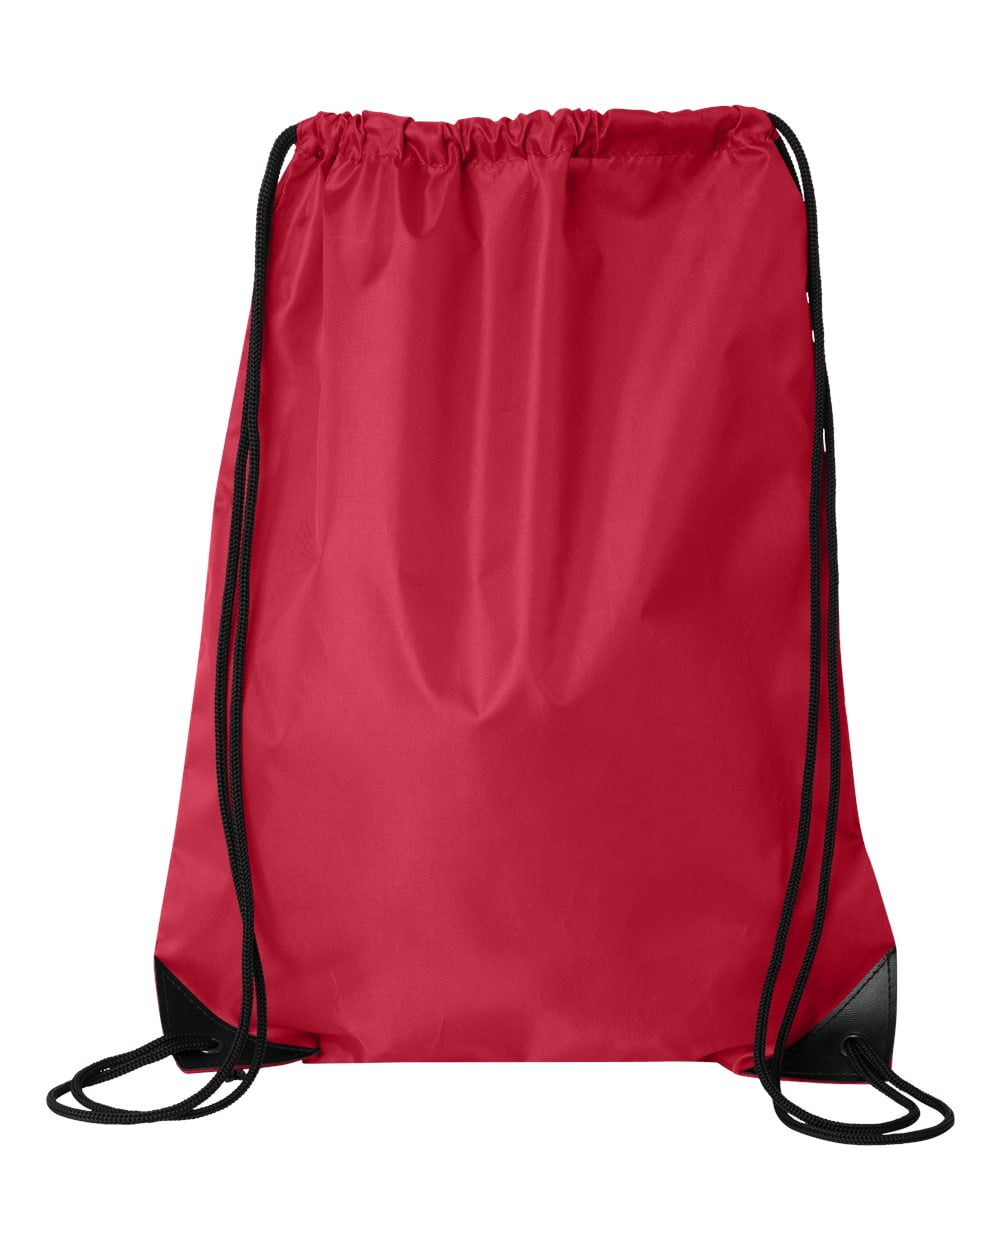 Value Black Cord Drawstring Sports Backpack Bag, One Size, Red ...